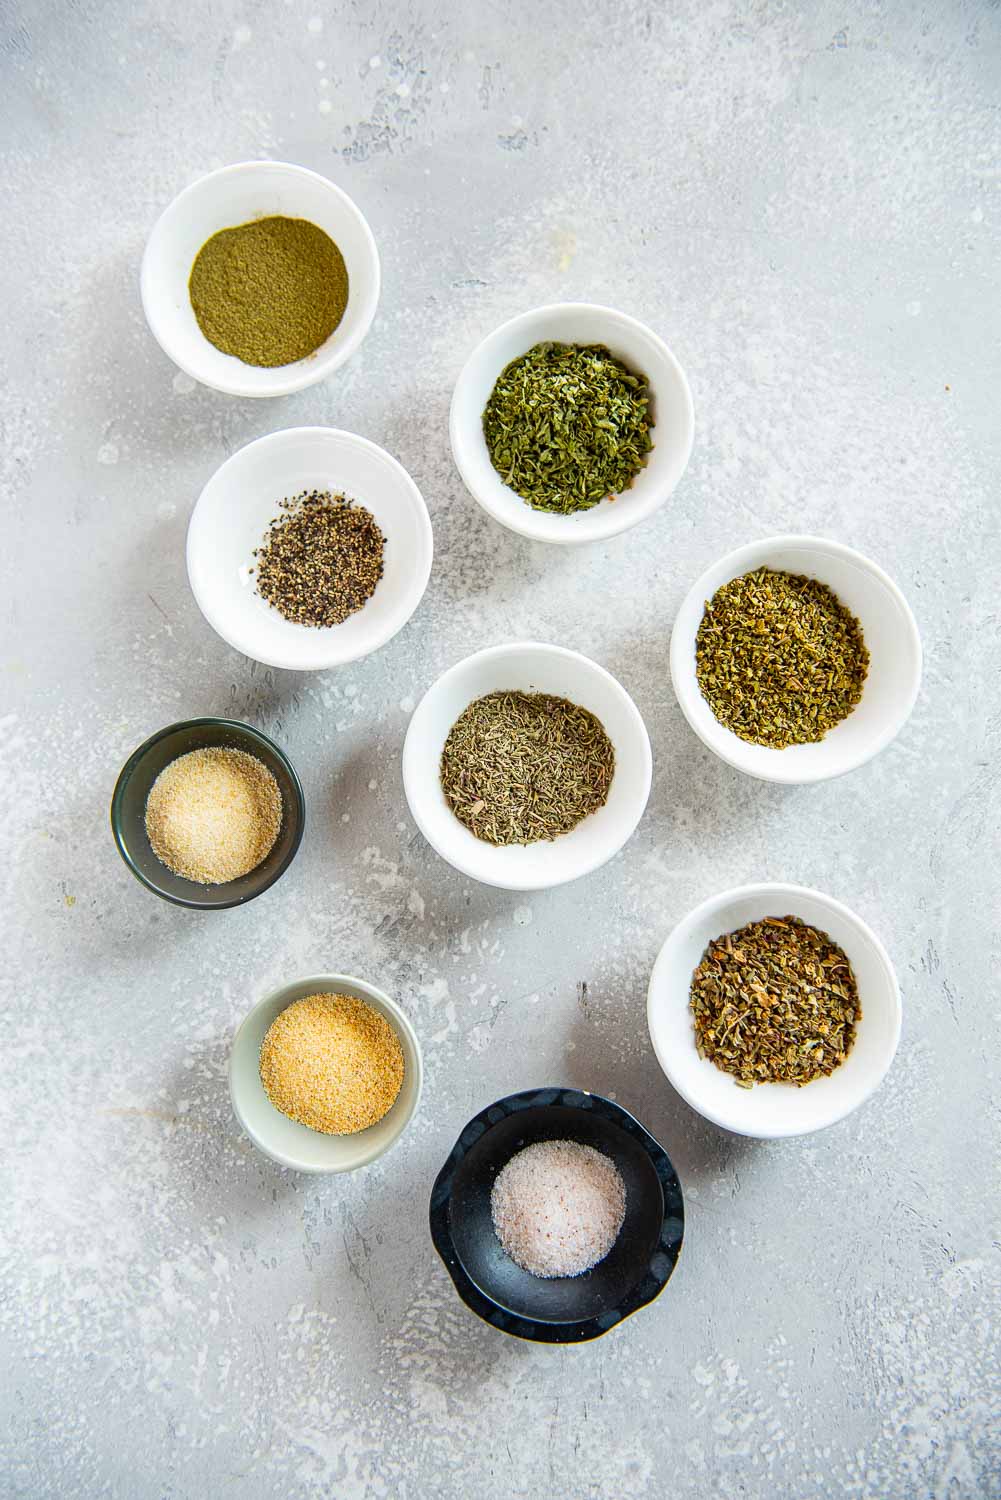 variety of seasonings and spices in 9 small bowls